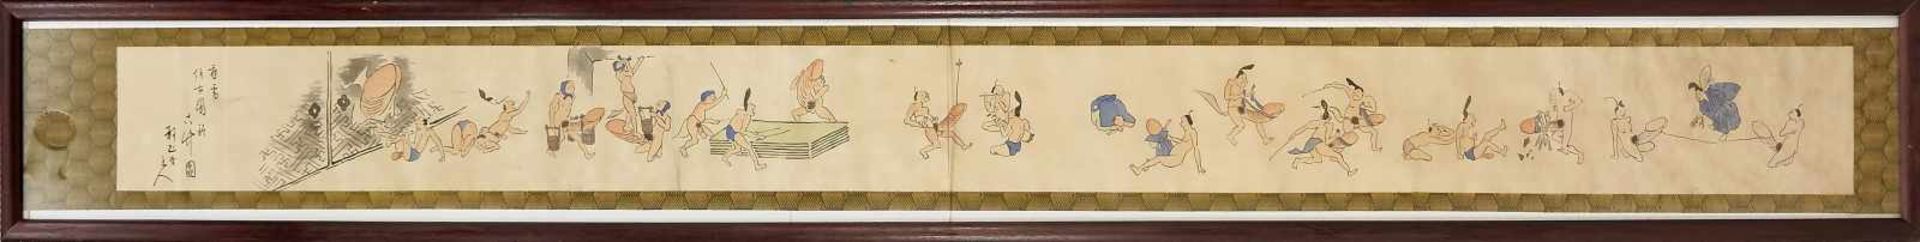 Scroll painting by Gyu Sai Kawanabe, mocking pictures of the strength of the man, Japan, - Bild 6 aus 6